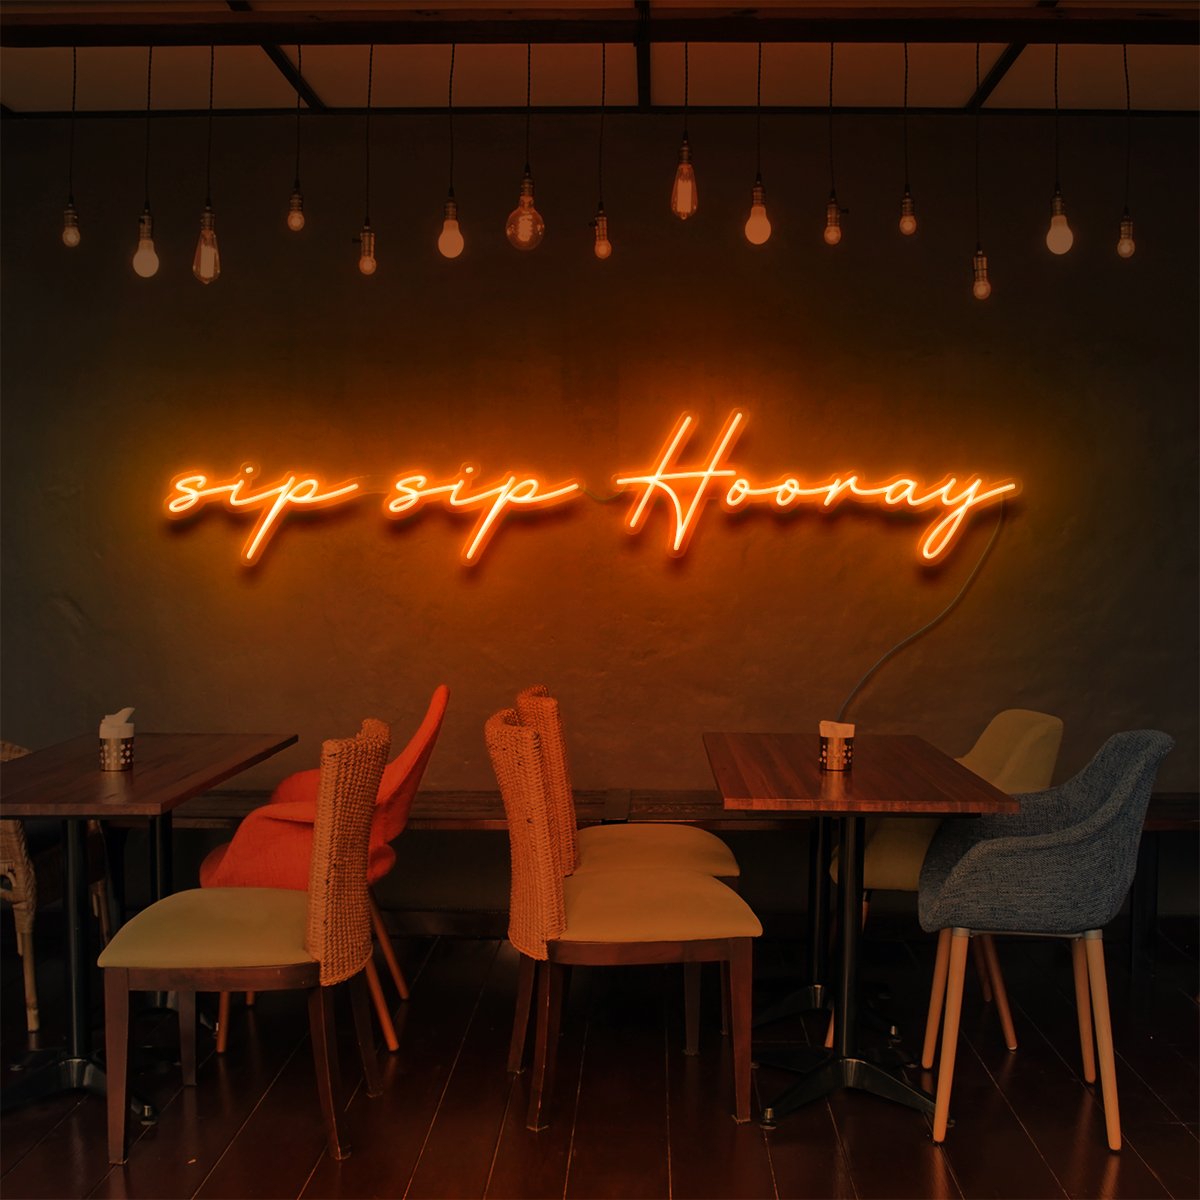 "Sip Sip Hooray" Neon Sign for Bars & Restaurants 90cm (3ft) / Orange / LED Neon by Neon Icons